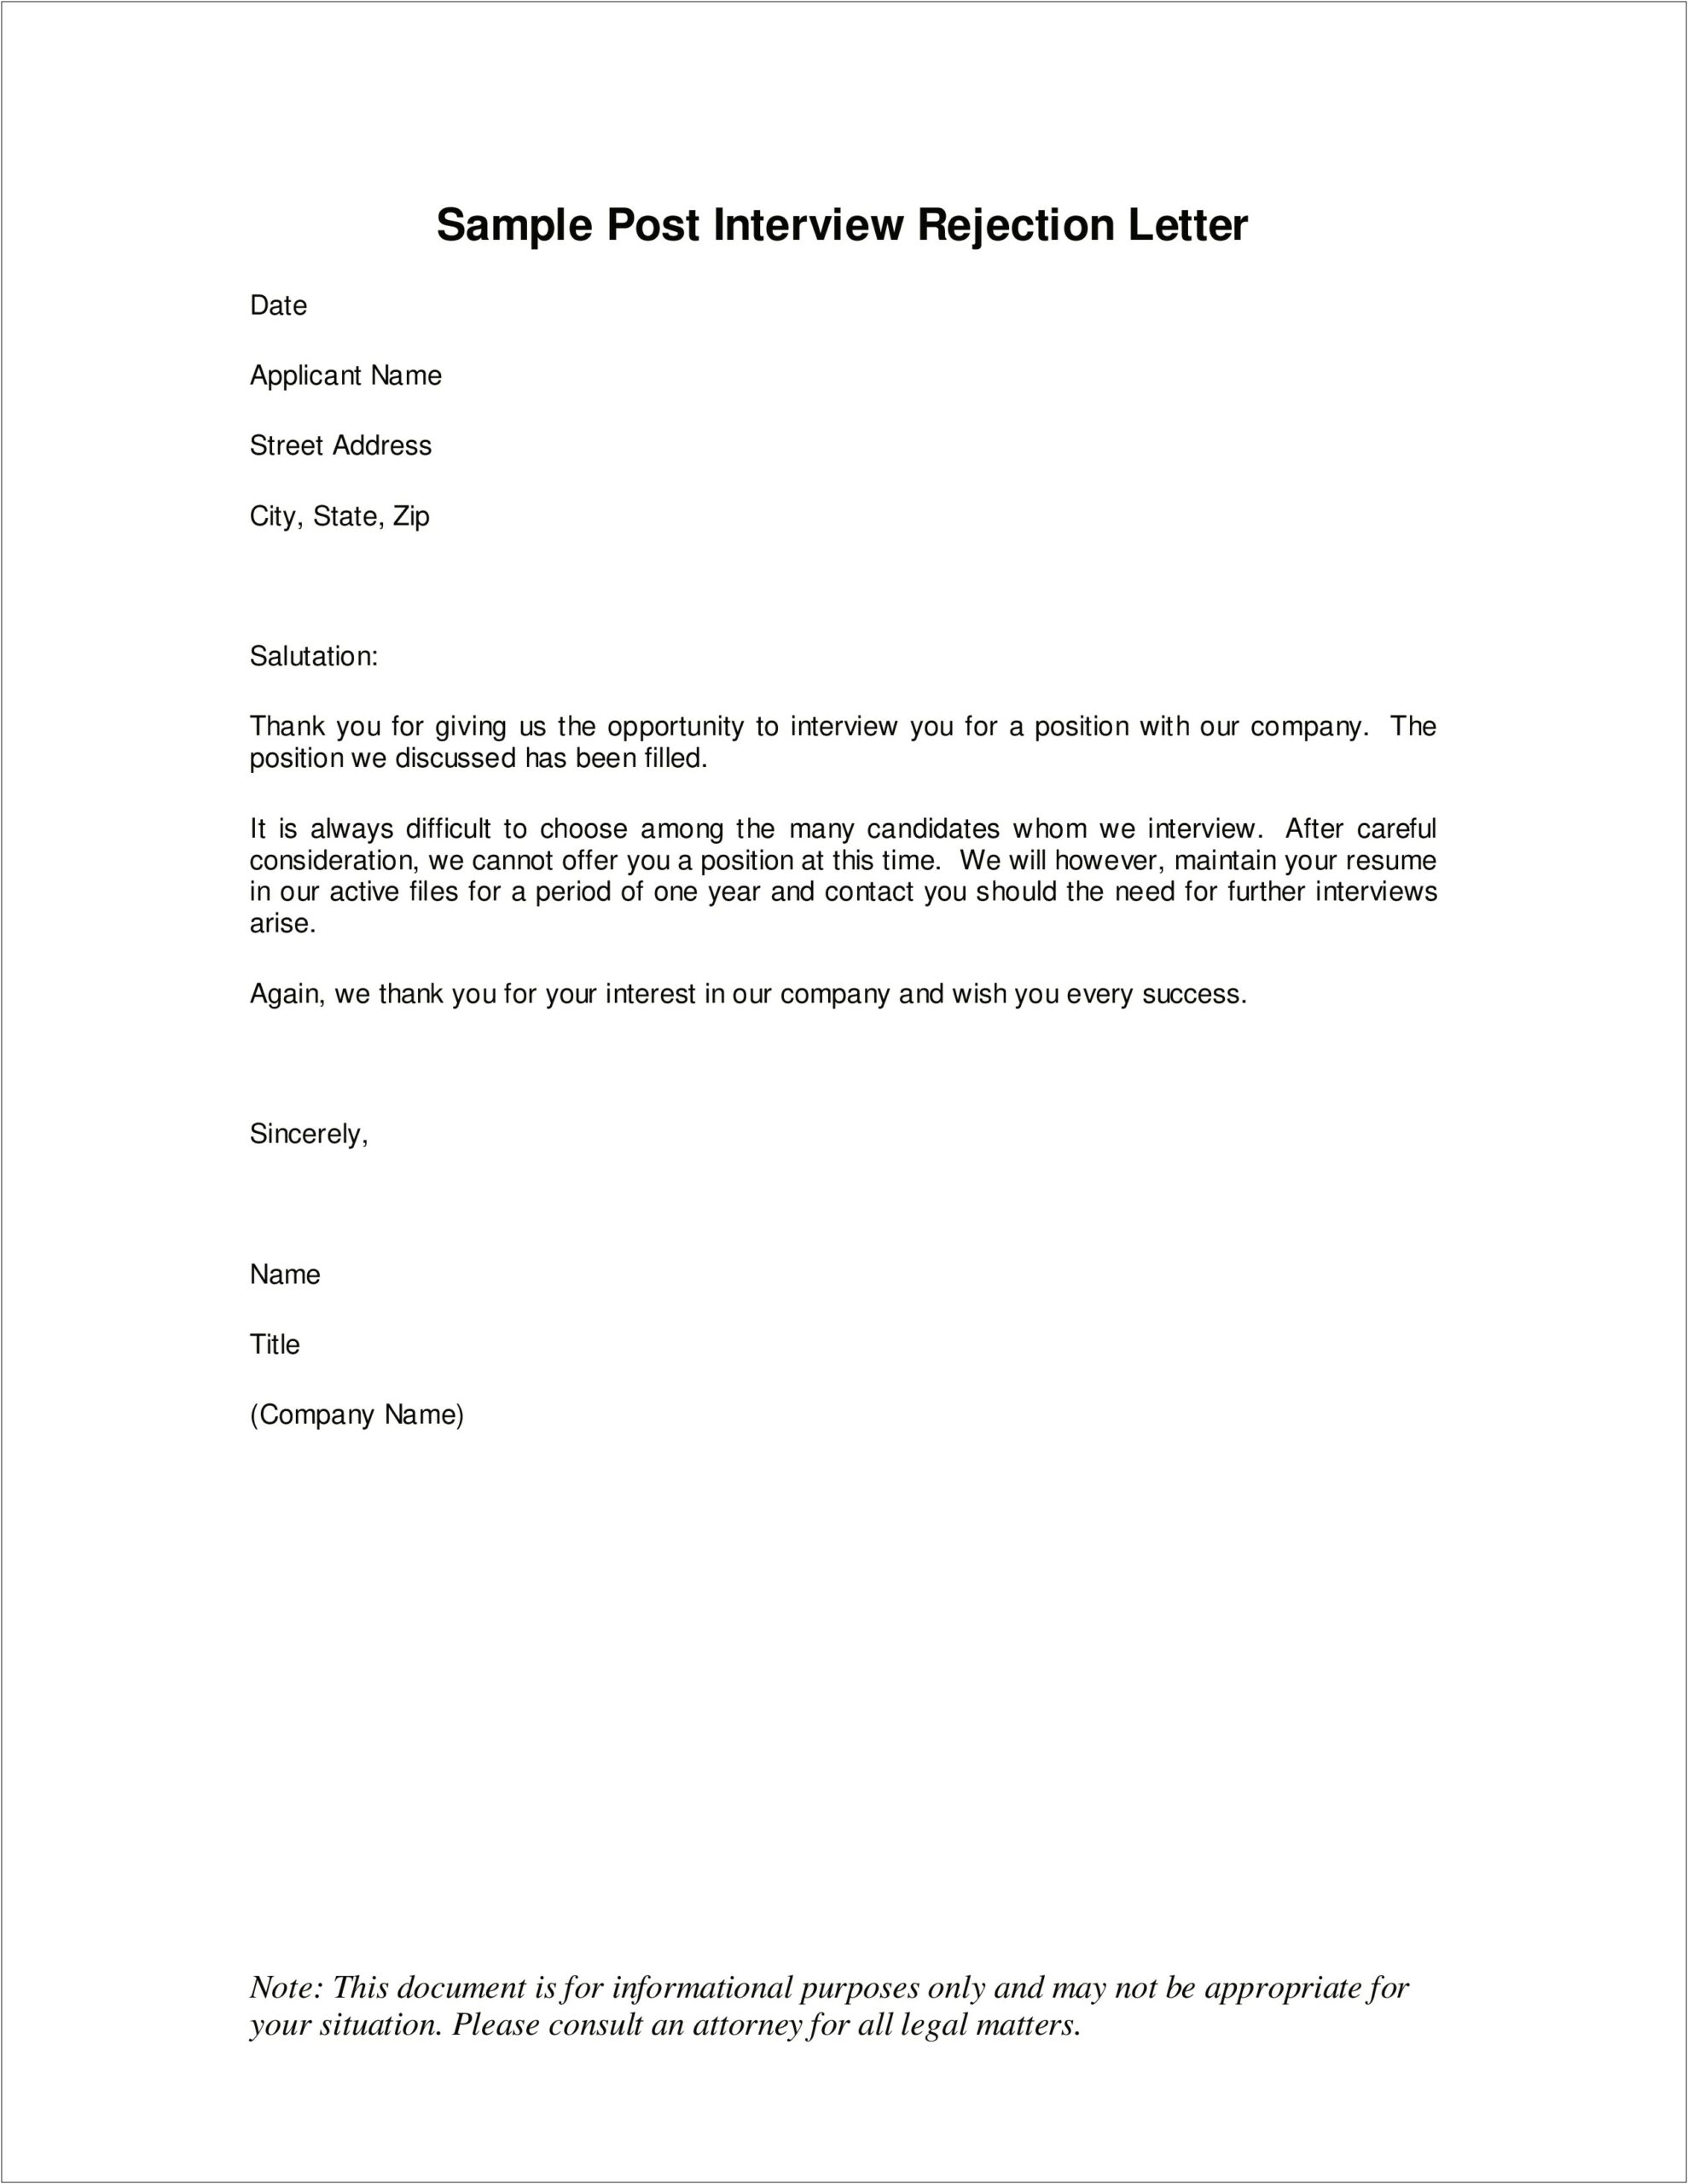 Thank You Letter For Applicants Resume